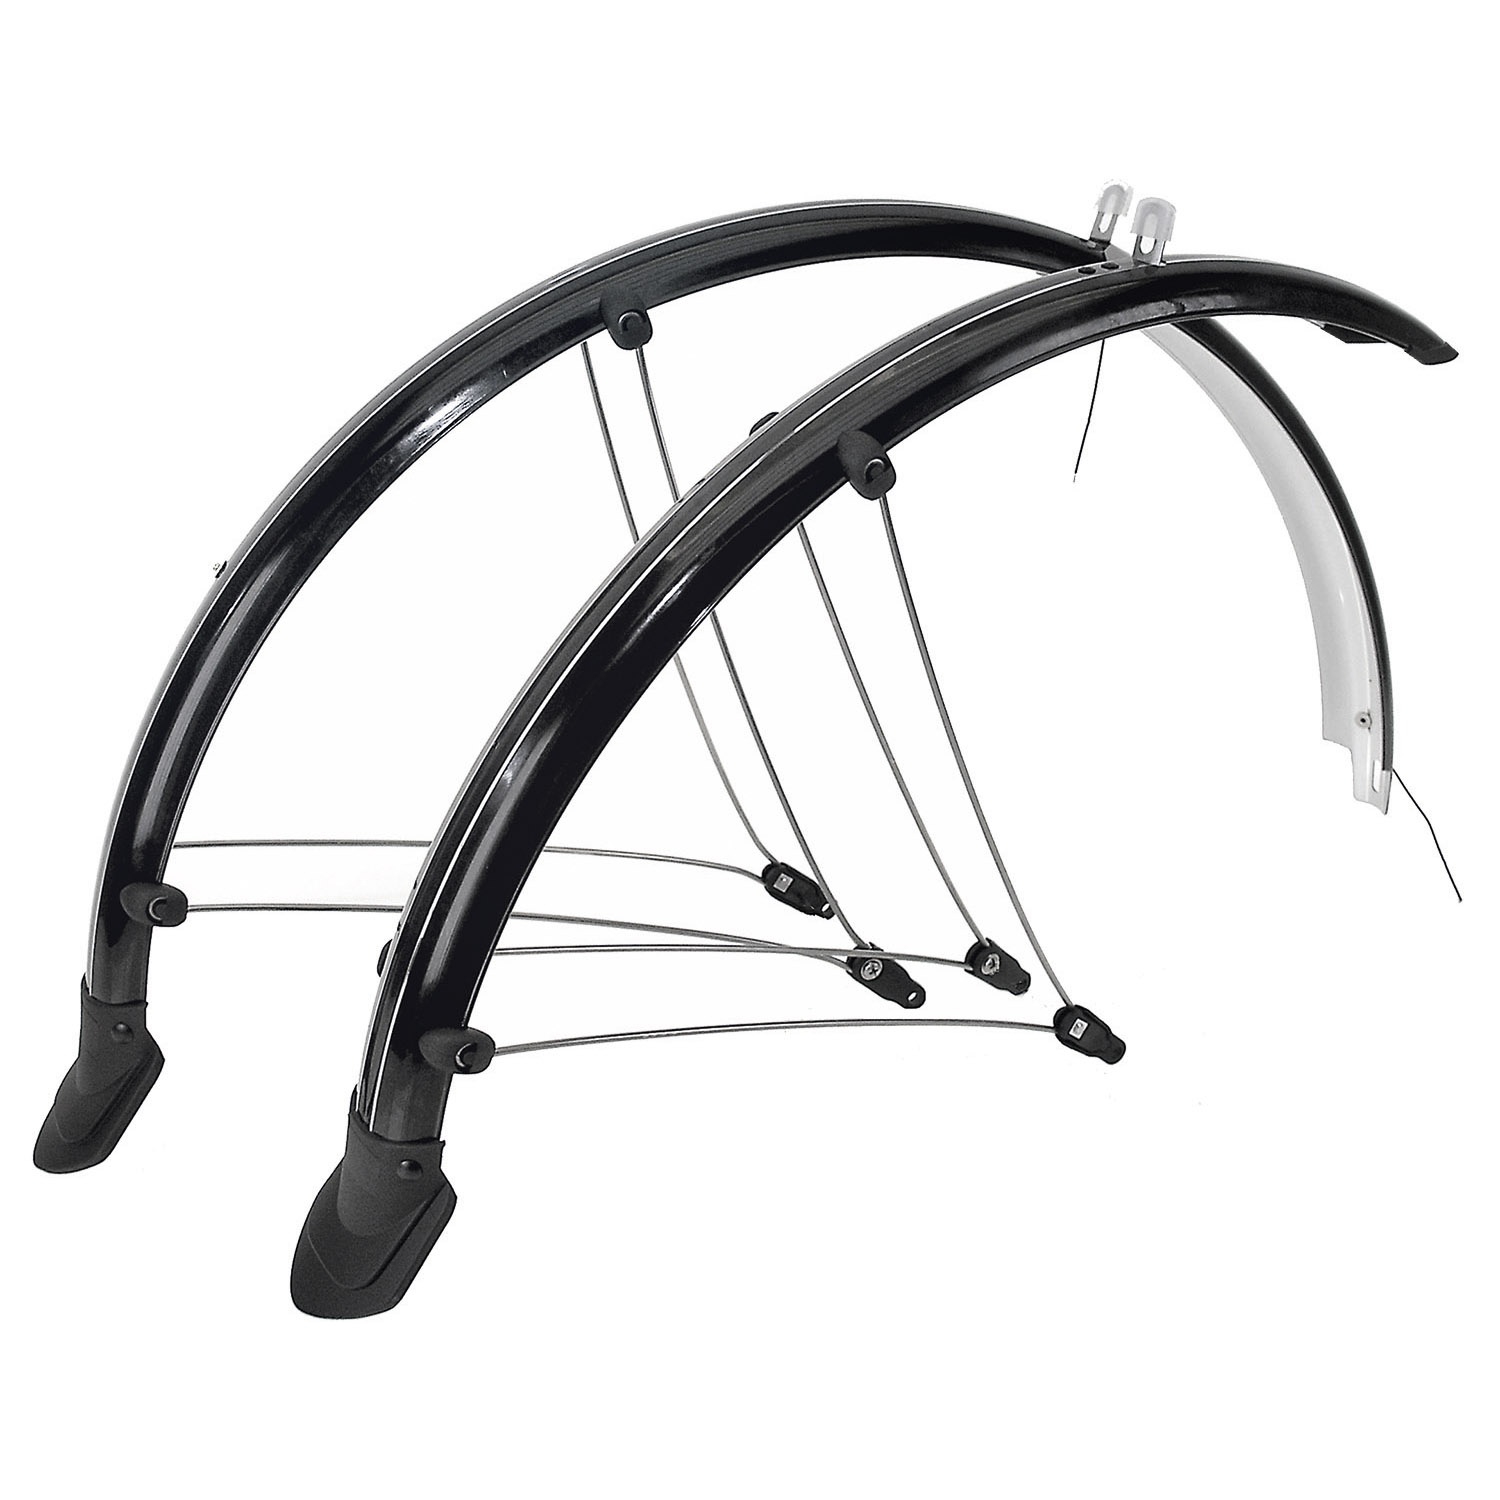 mudguards for 29 inch wheels